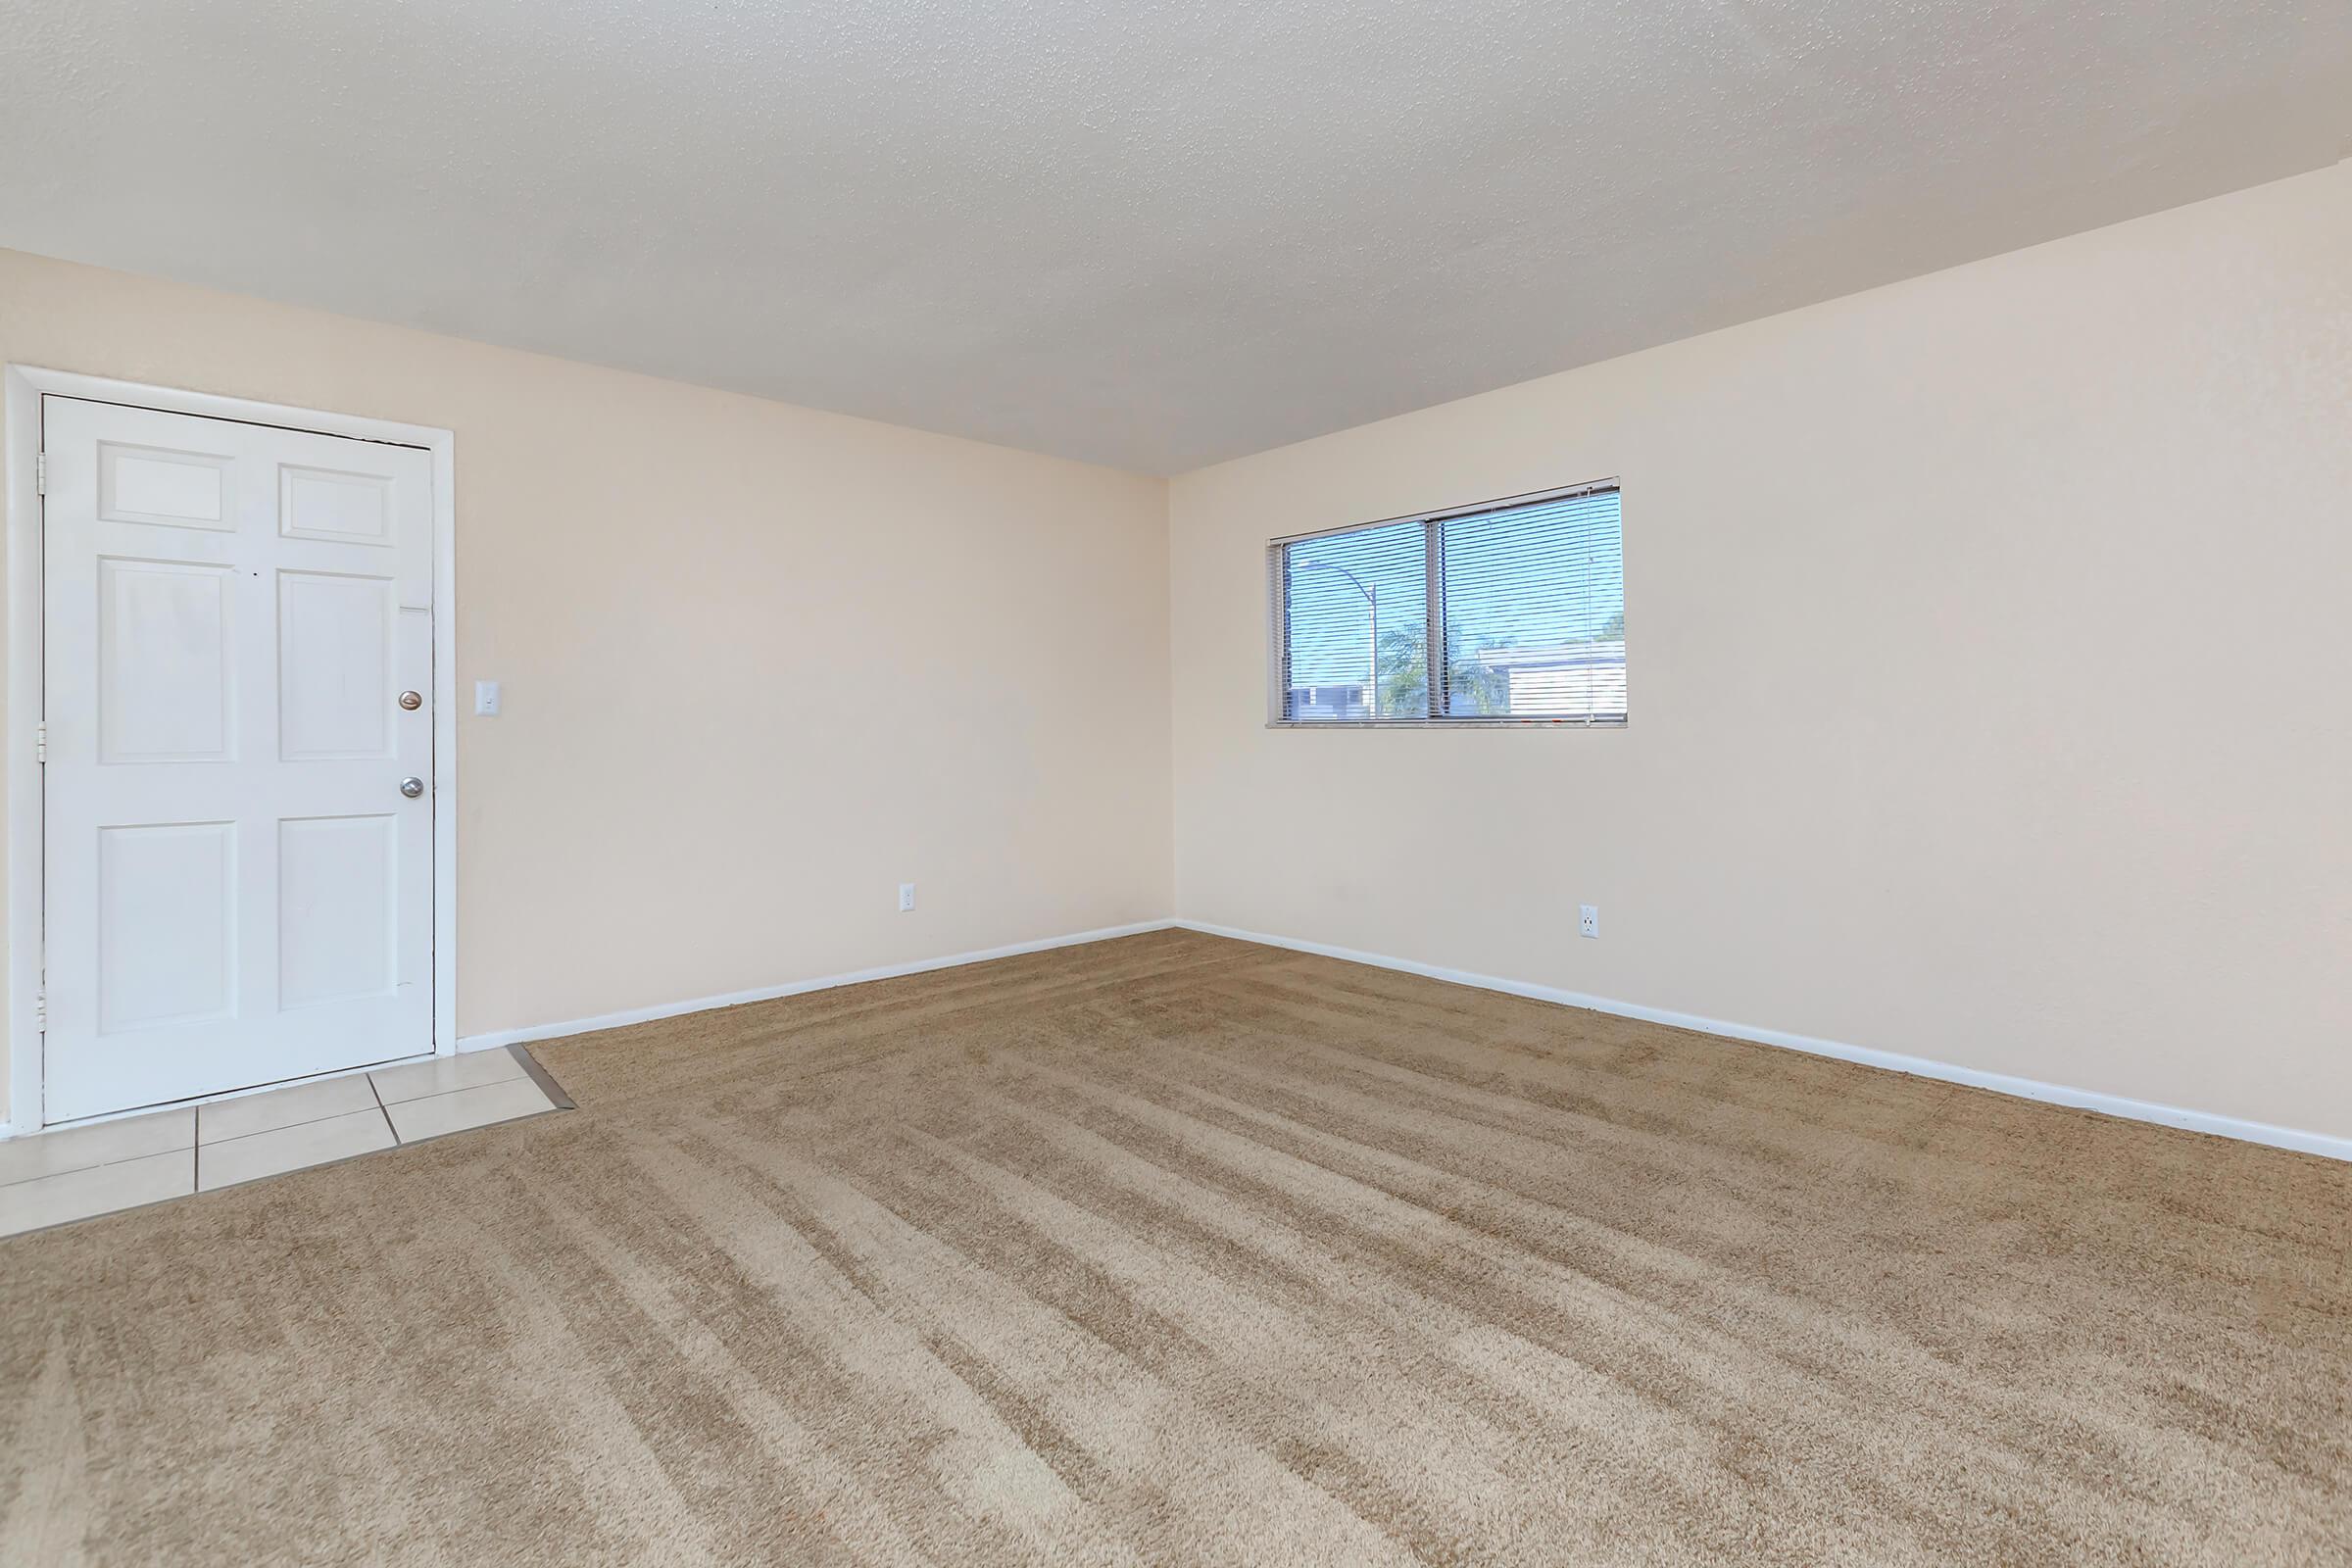 PLUSH CARPETING IN YOUR NEW LIVING SPACE AT THE CROSSINGS AT 66TH APARTMENTS